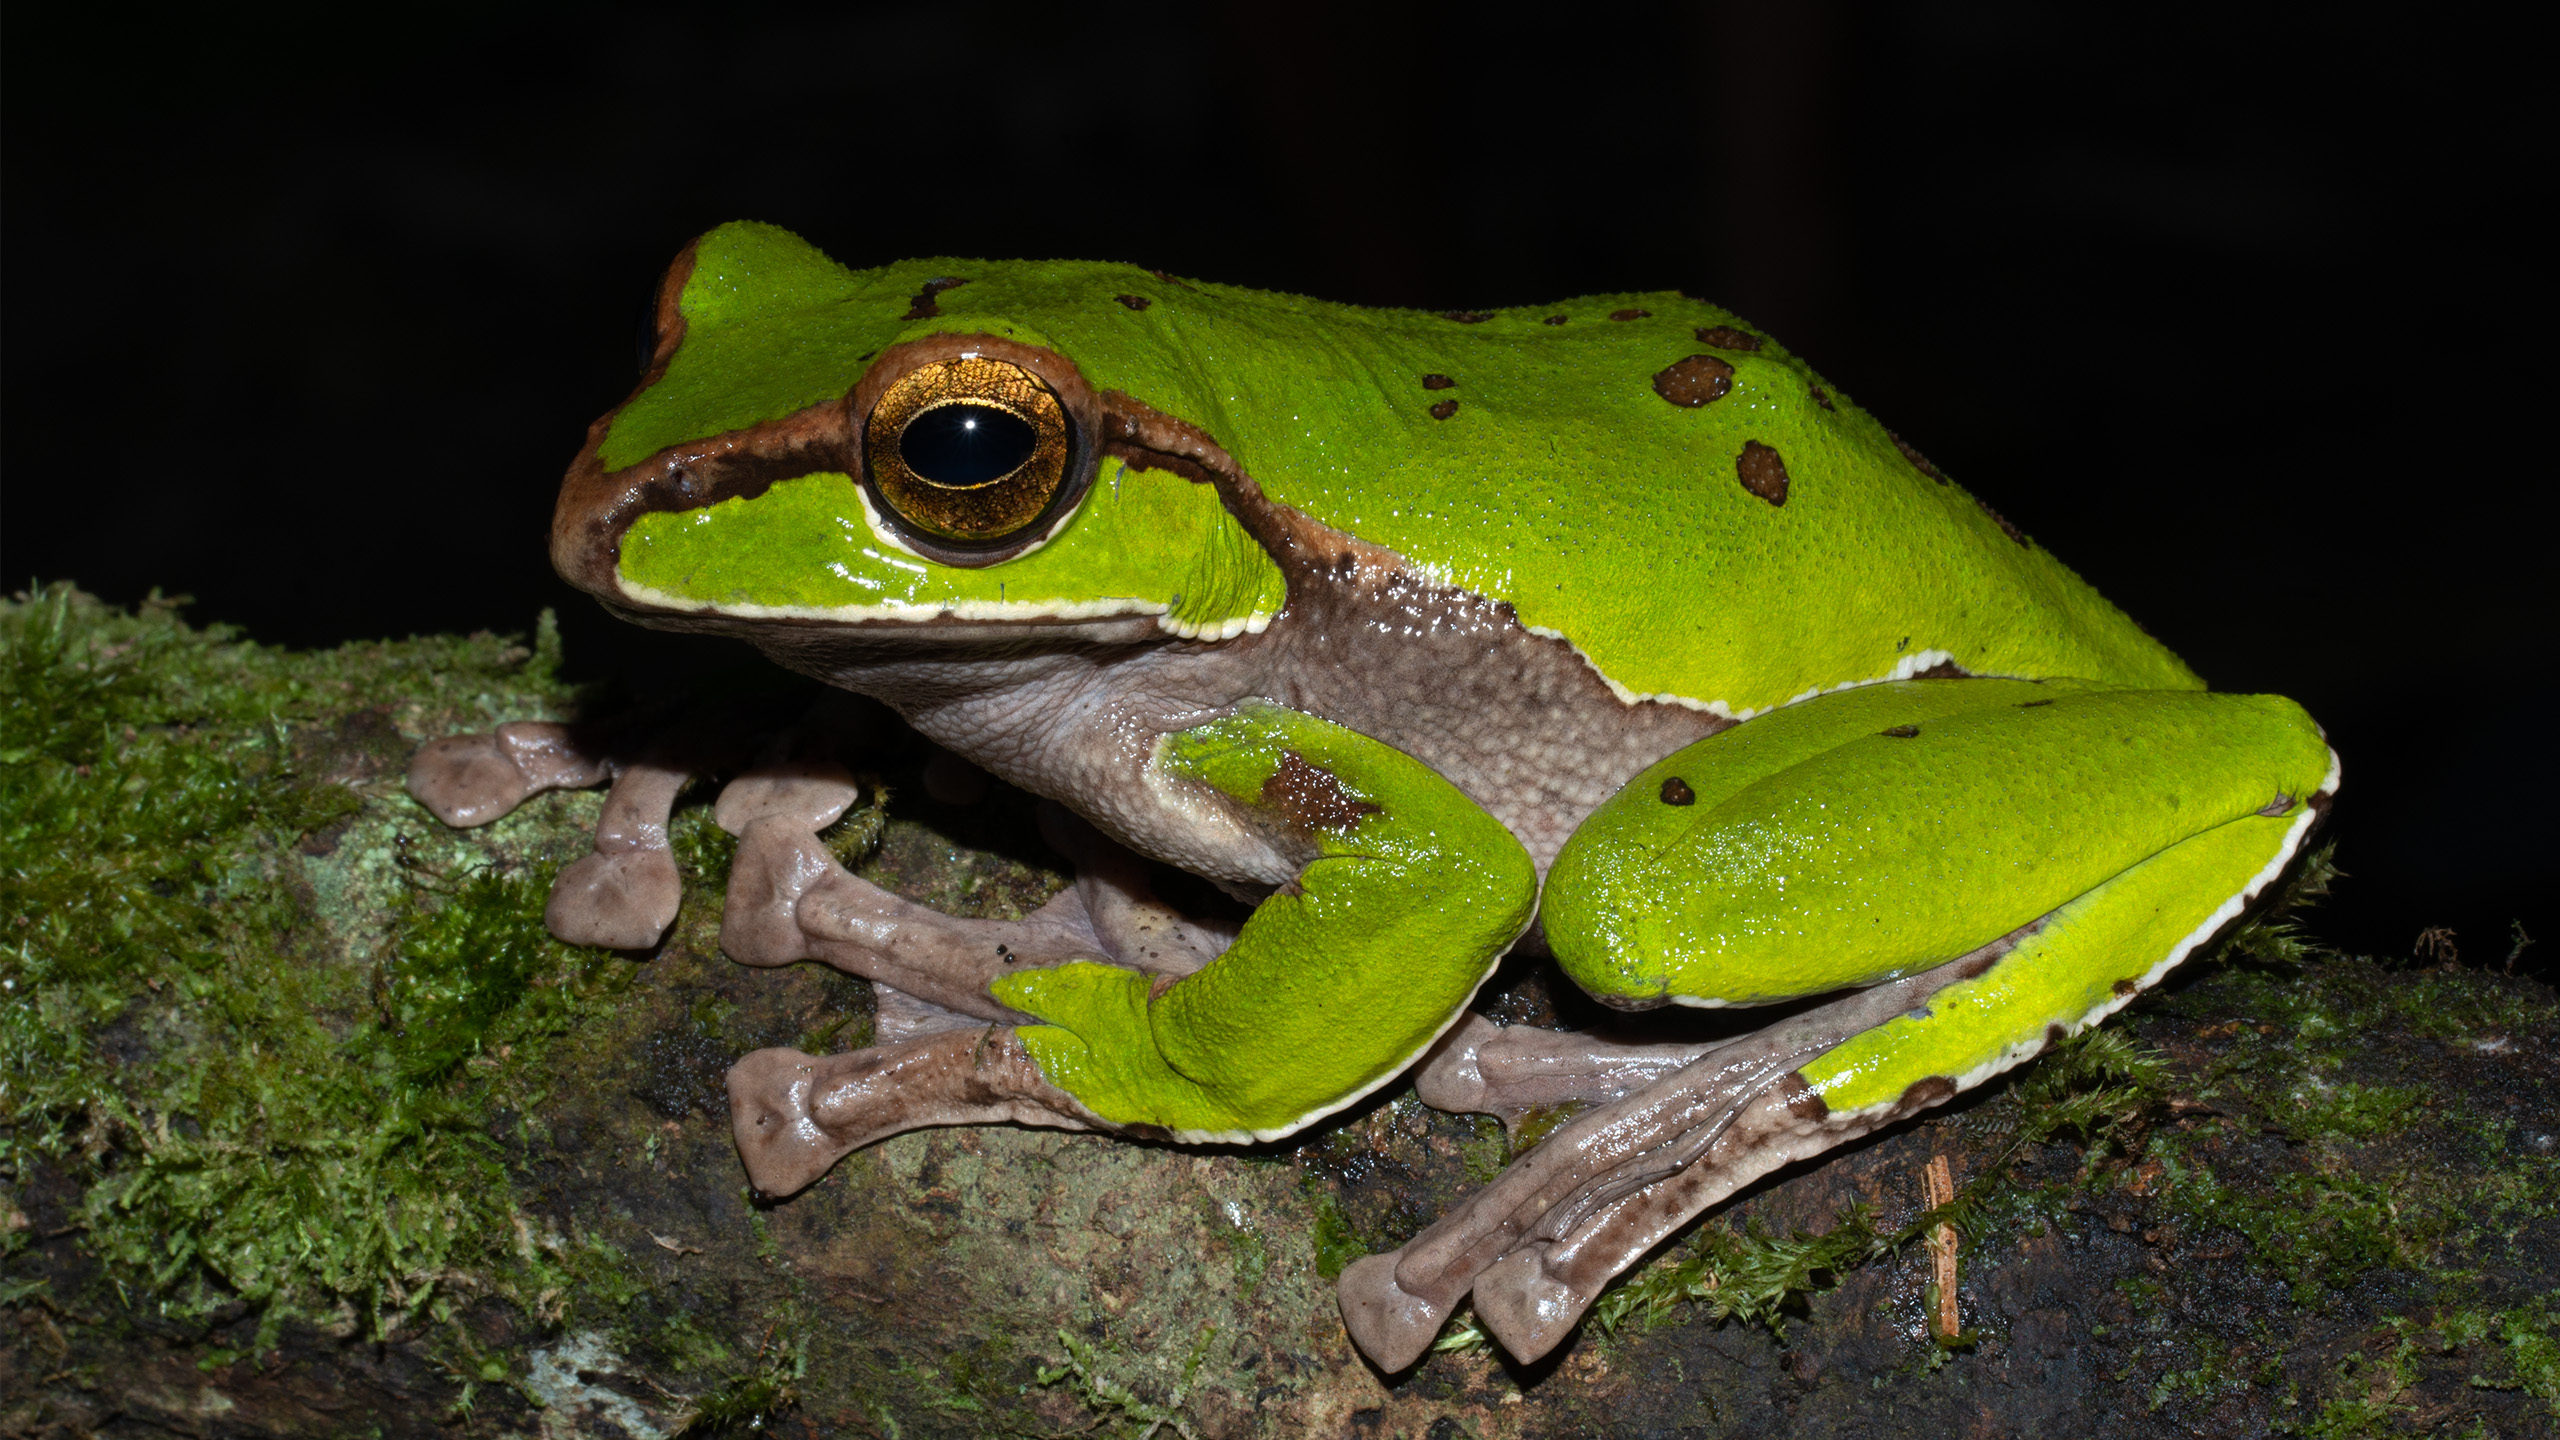 The northern Vietnamese forests still hold many surprises – the magnificent Frank's tree frog Zhangixalus franki was only described as a new species in 2020. | Tao T. Nguyen